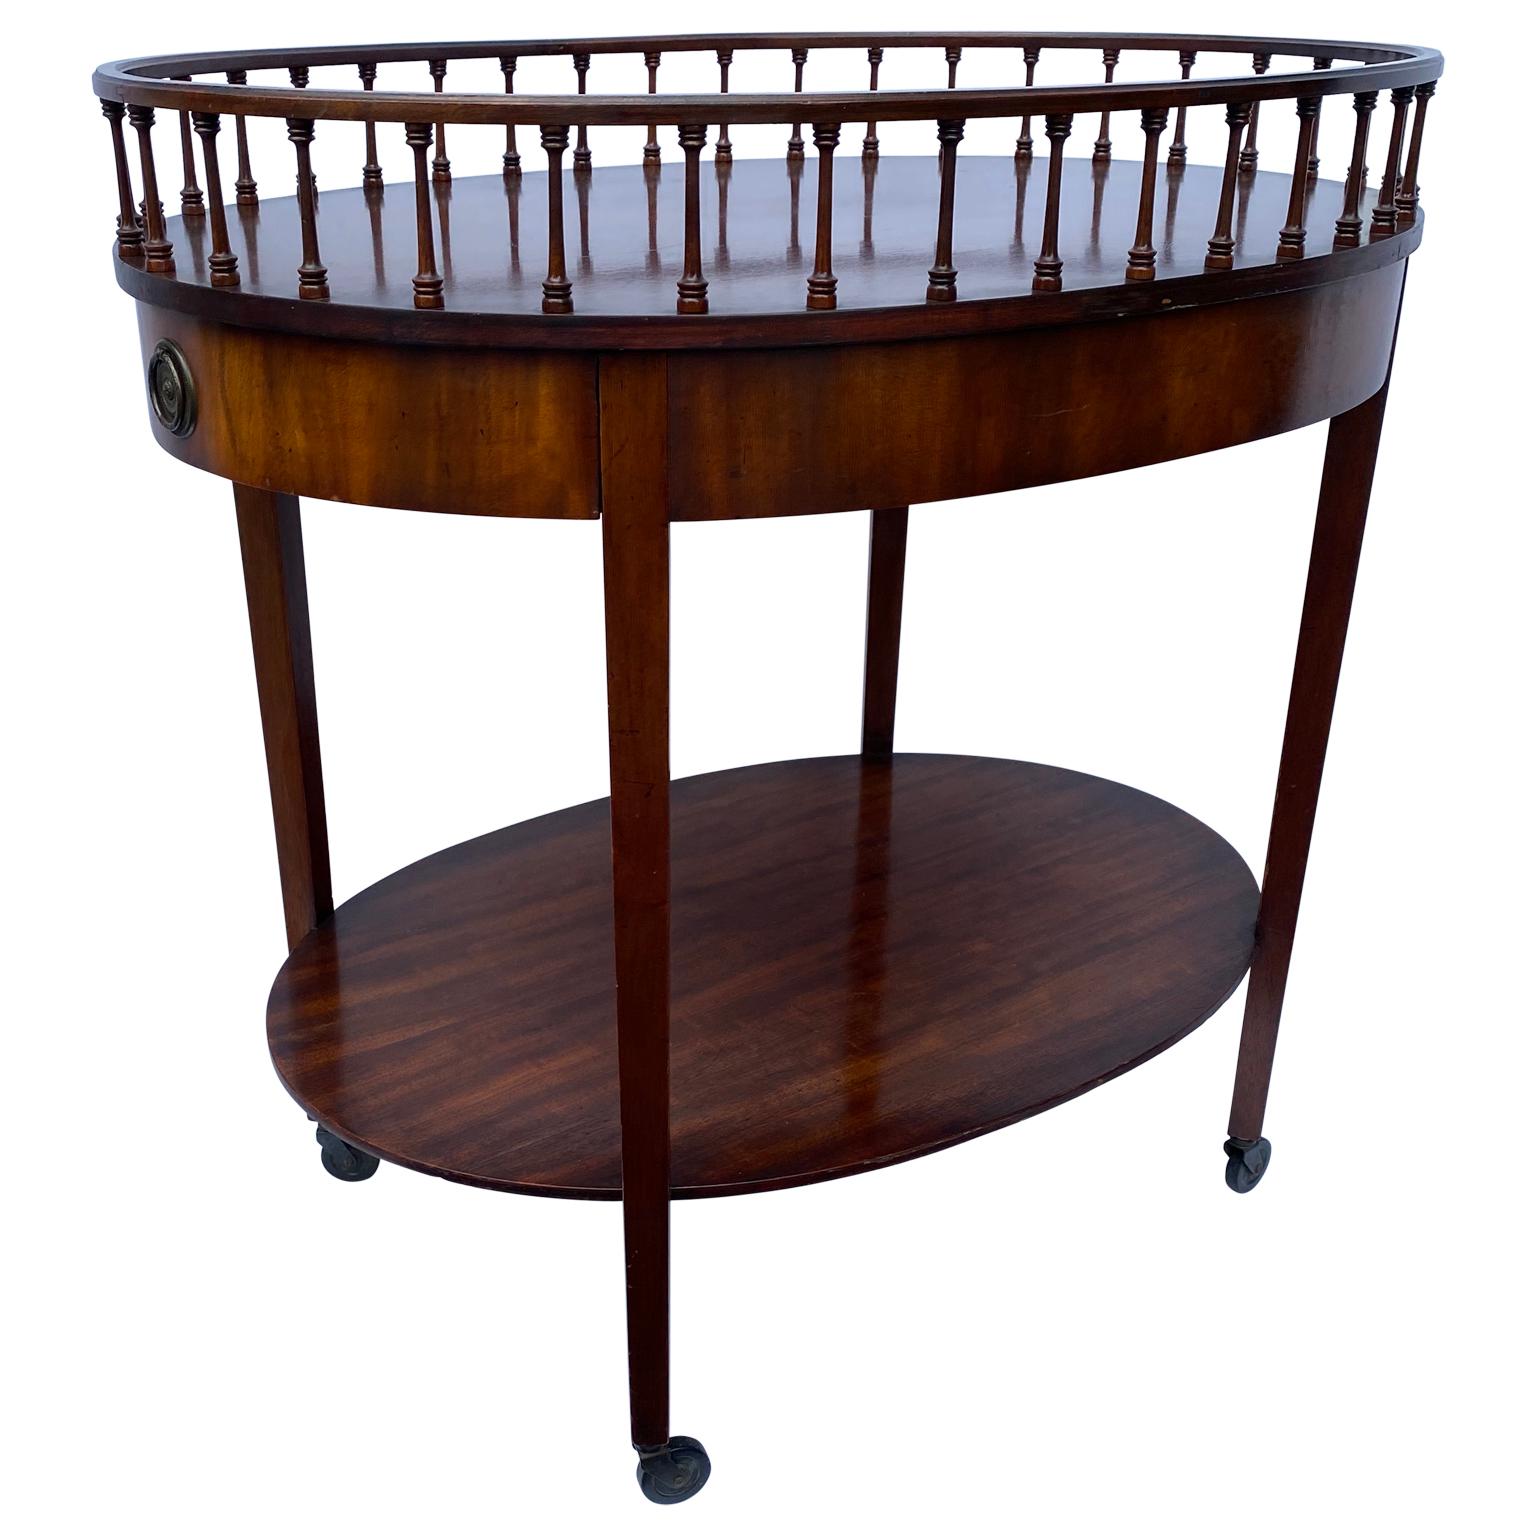 Hand-Crafted Oval Wooden Two-Tier Tea Bar Cart Trolley With Brass Hardware And Drawer